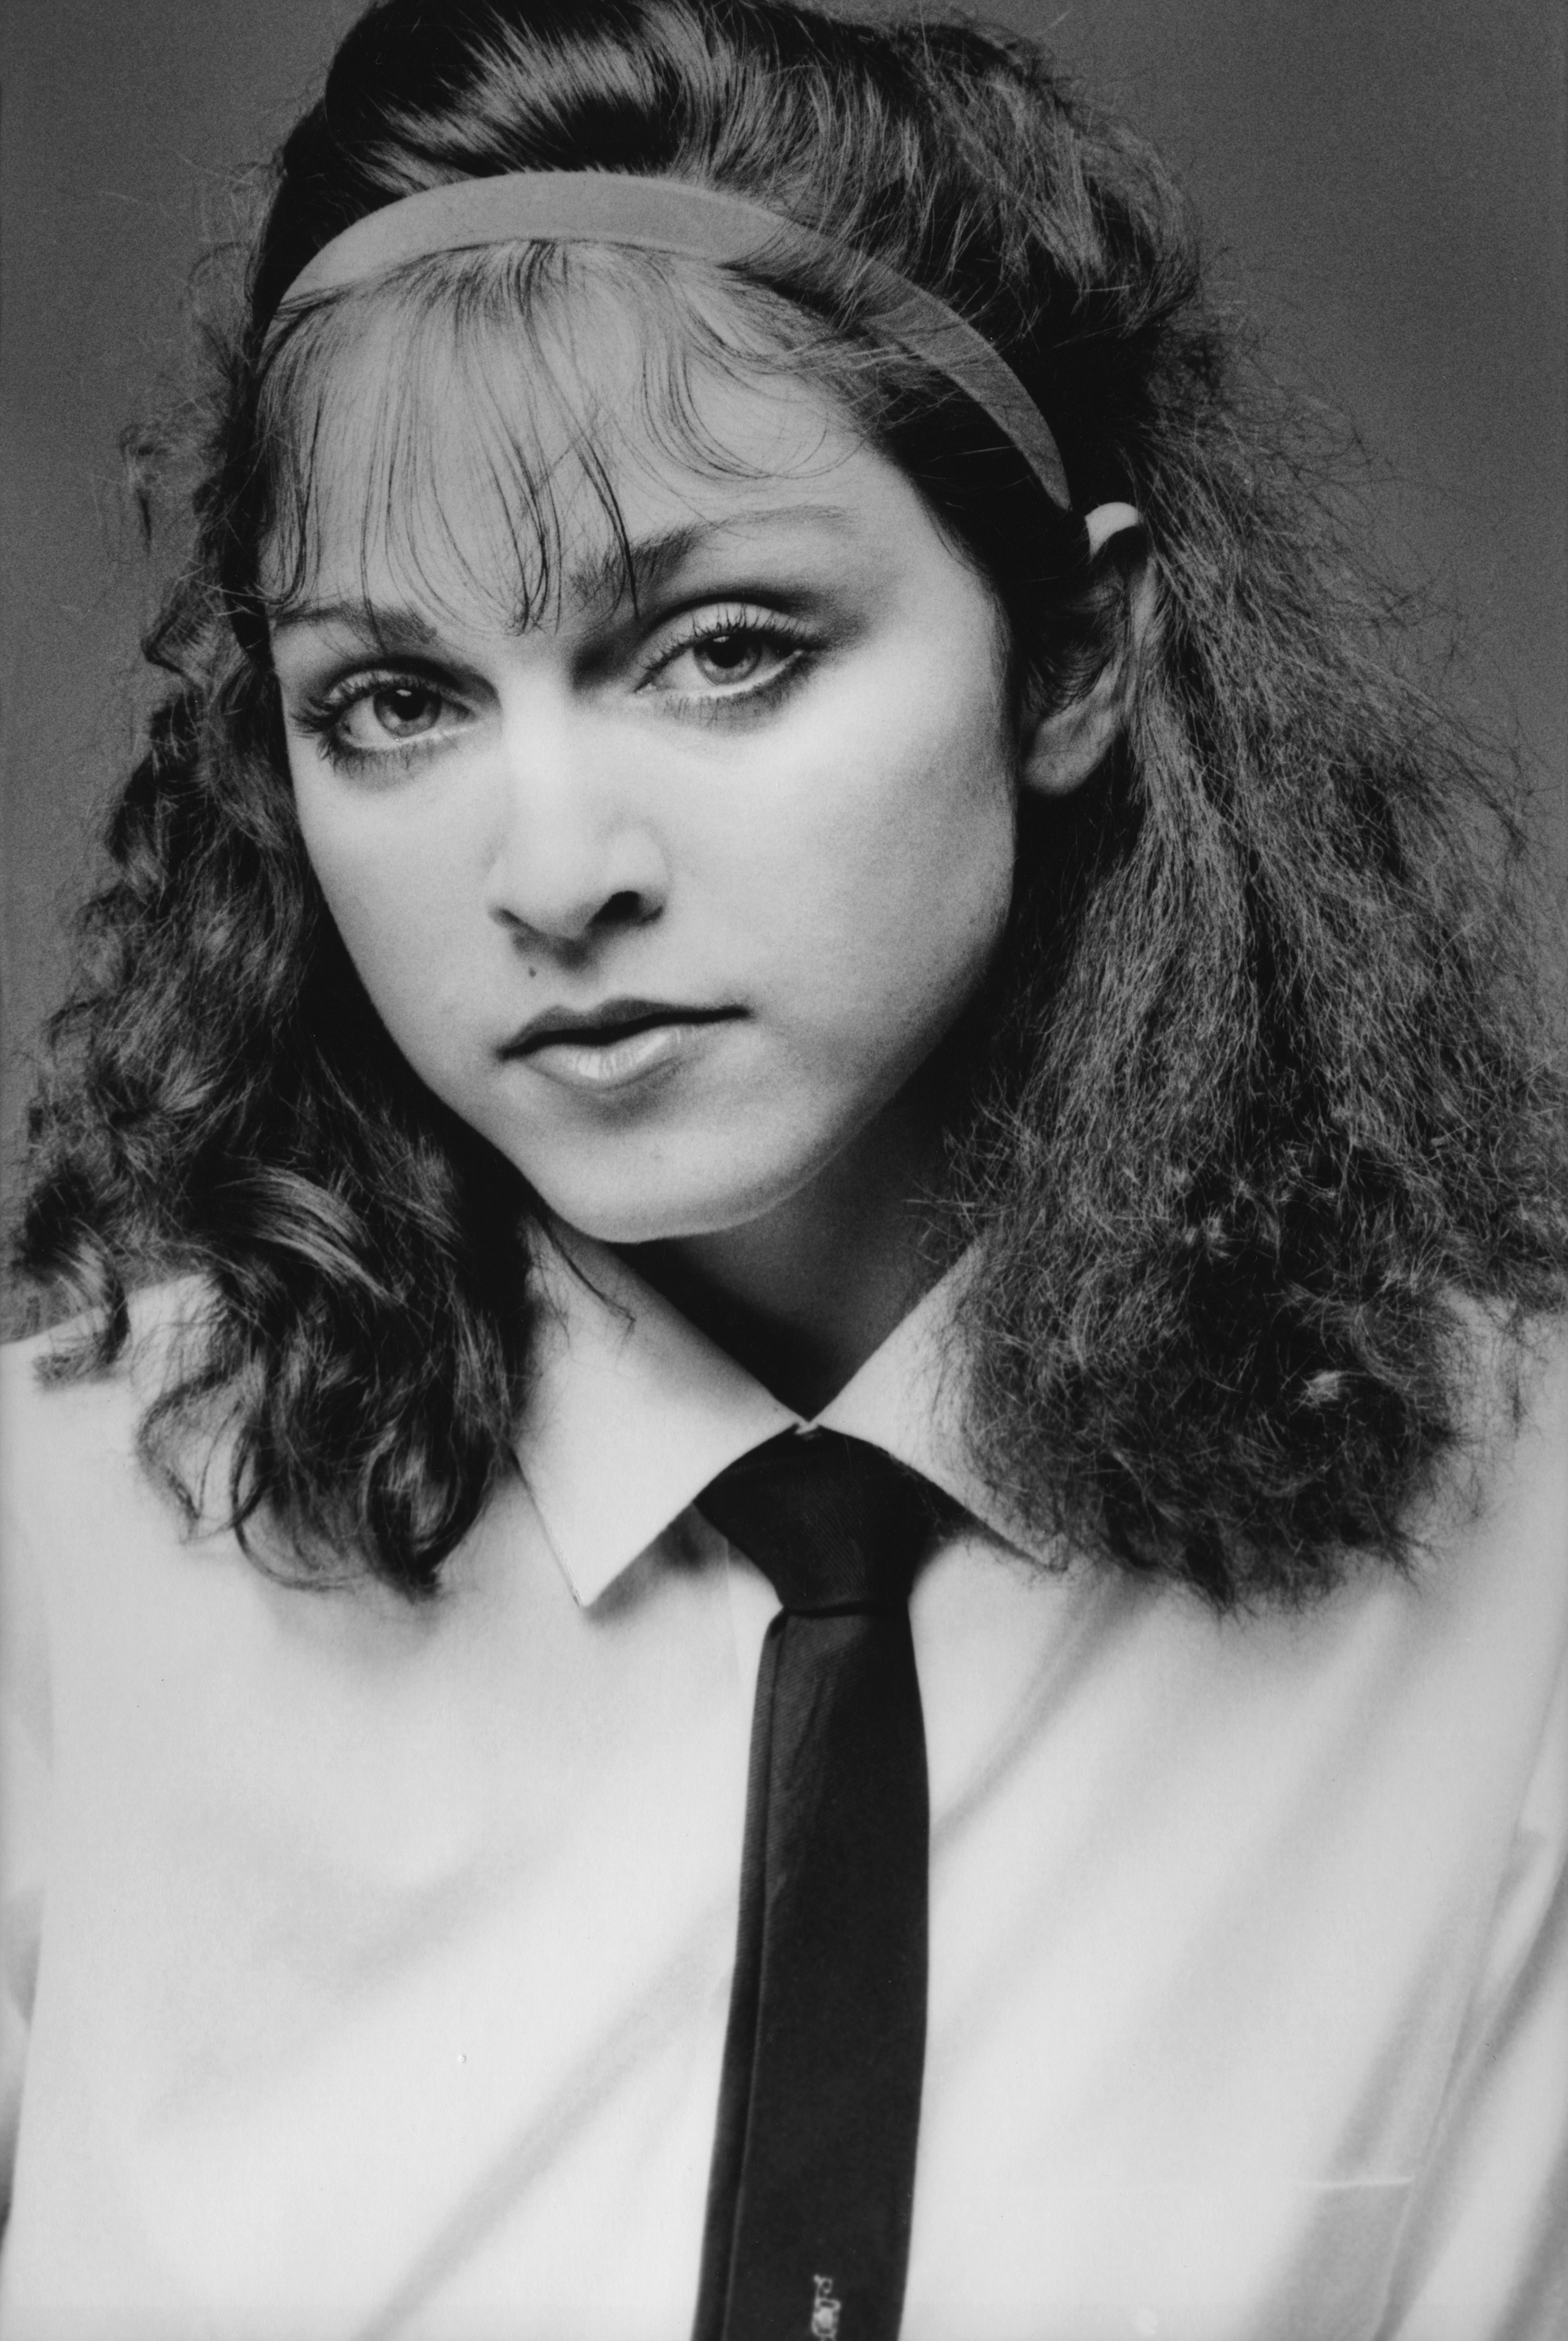 Madonna posing for a portrait in New York City in 1978